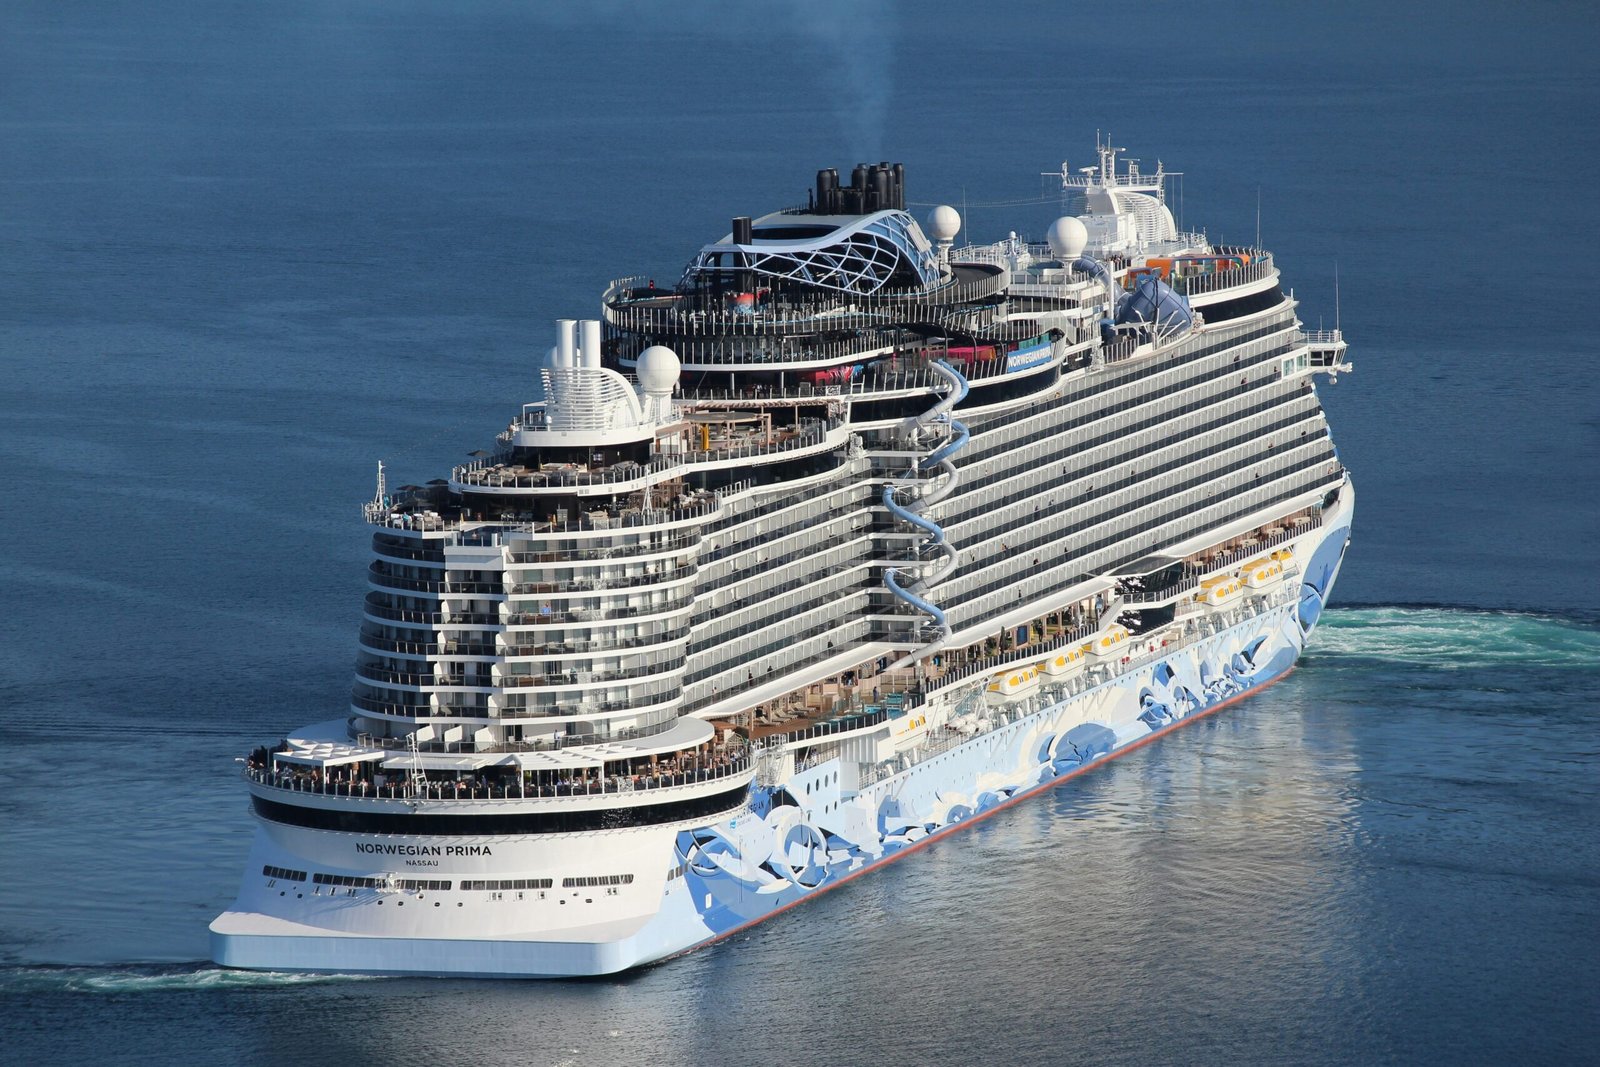 a large cruise ship in the middle of the ocean